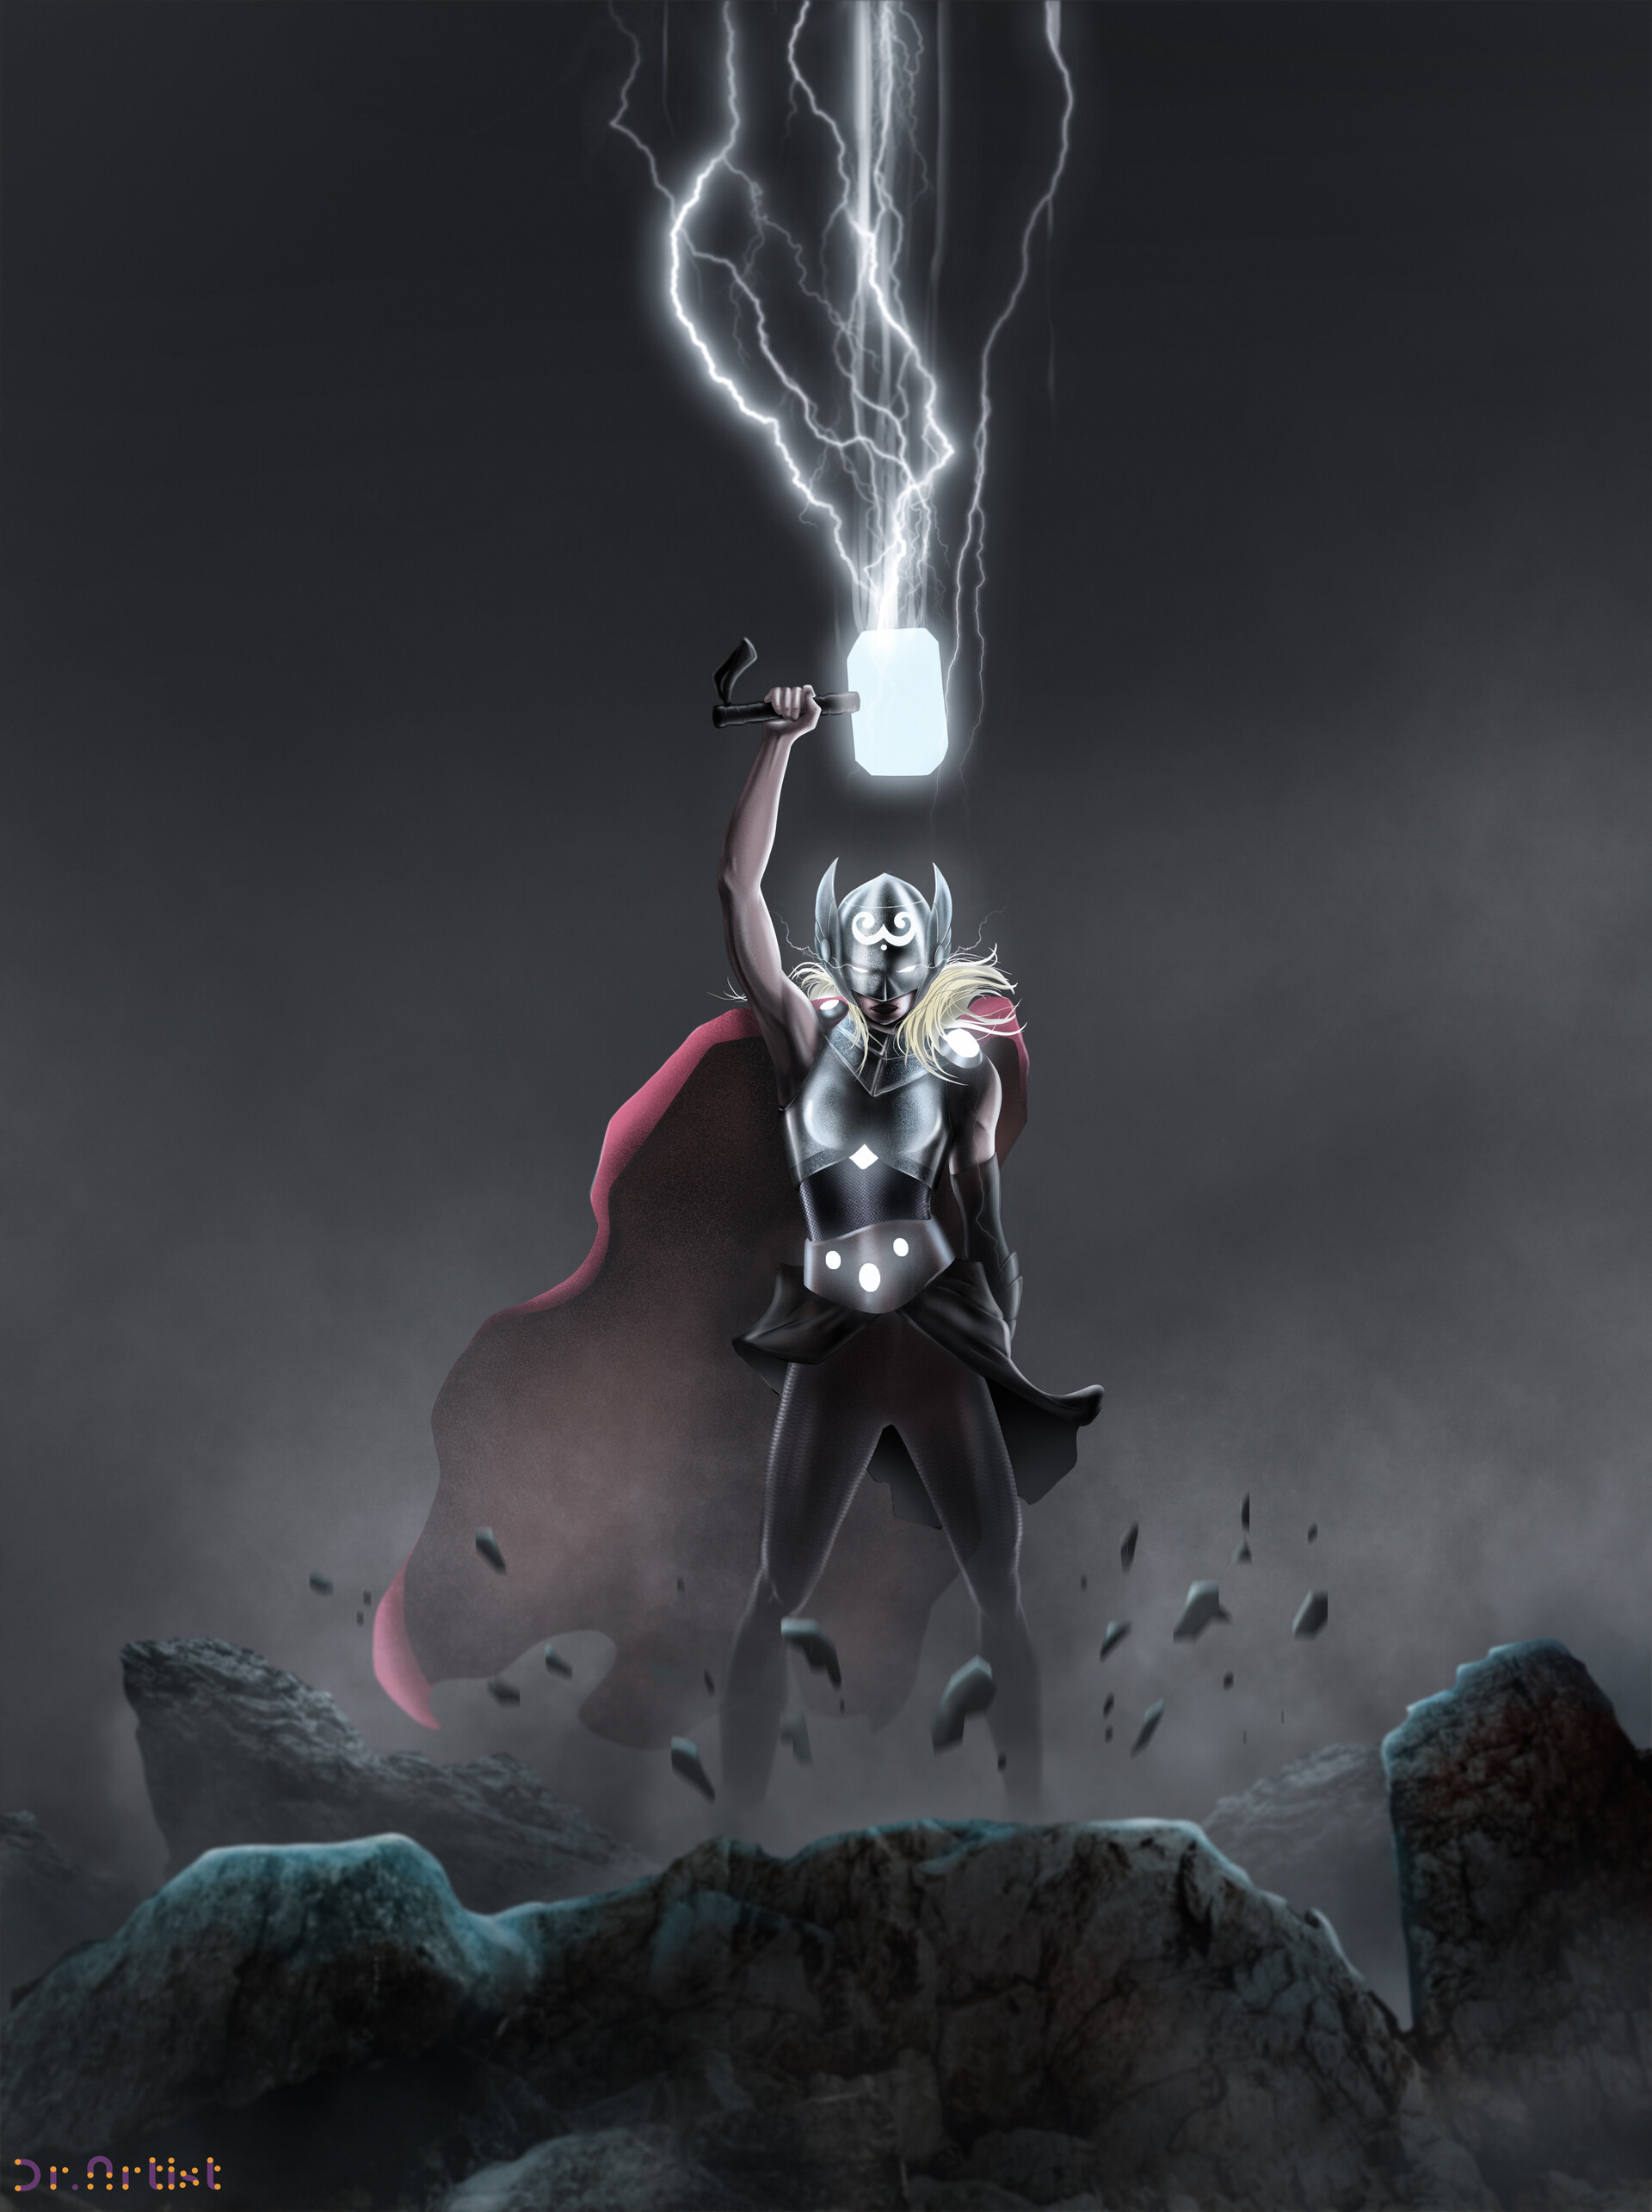 1920x1080202129 Jane Foster Lifting Mjolnir Art 1920x1080202129 Resolution  Wallpaper, HD Superheroes 4K Wallpapers, Images, Photos and Background -  Wallpapers Den